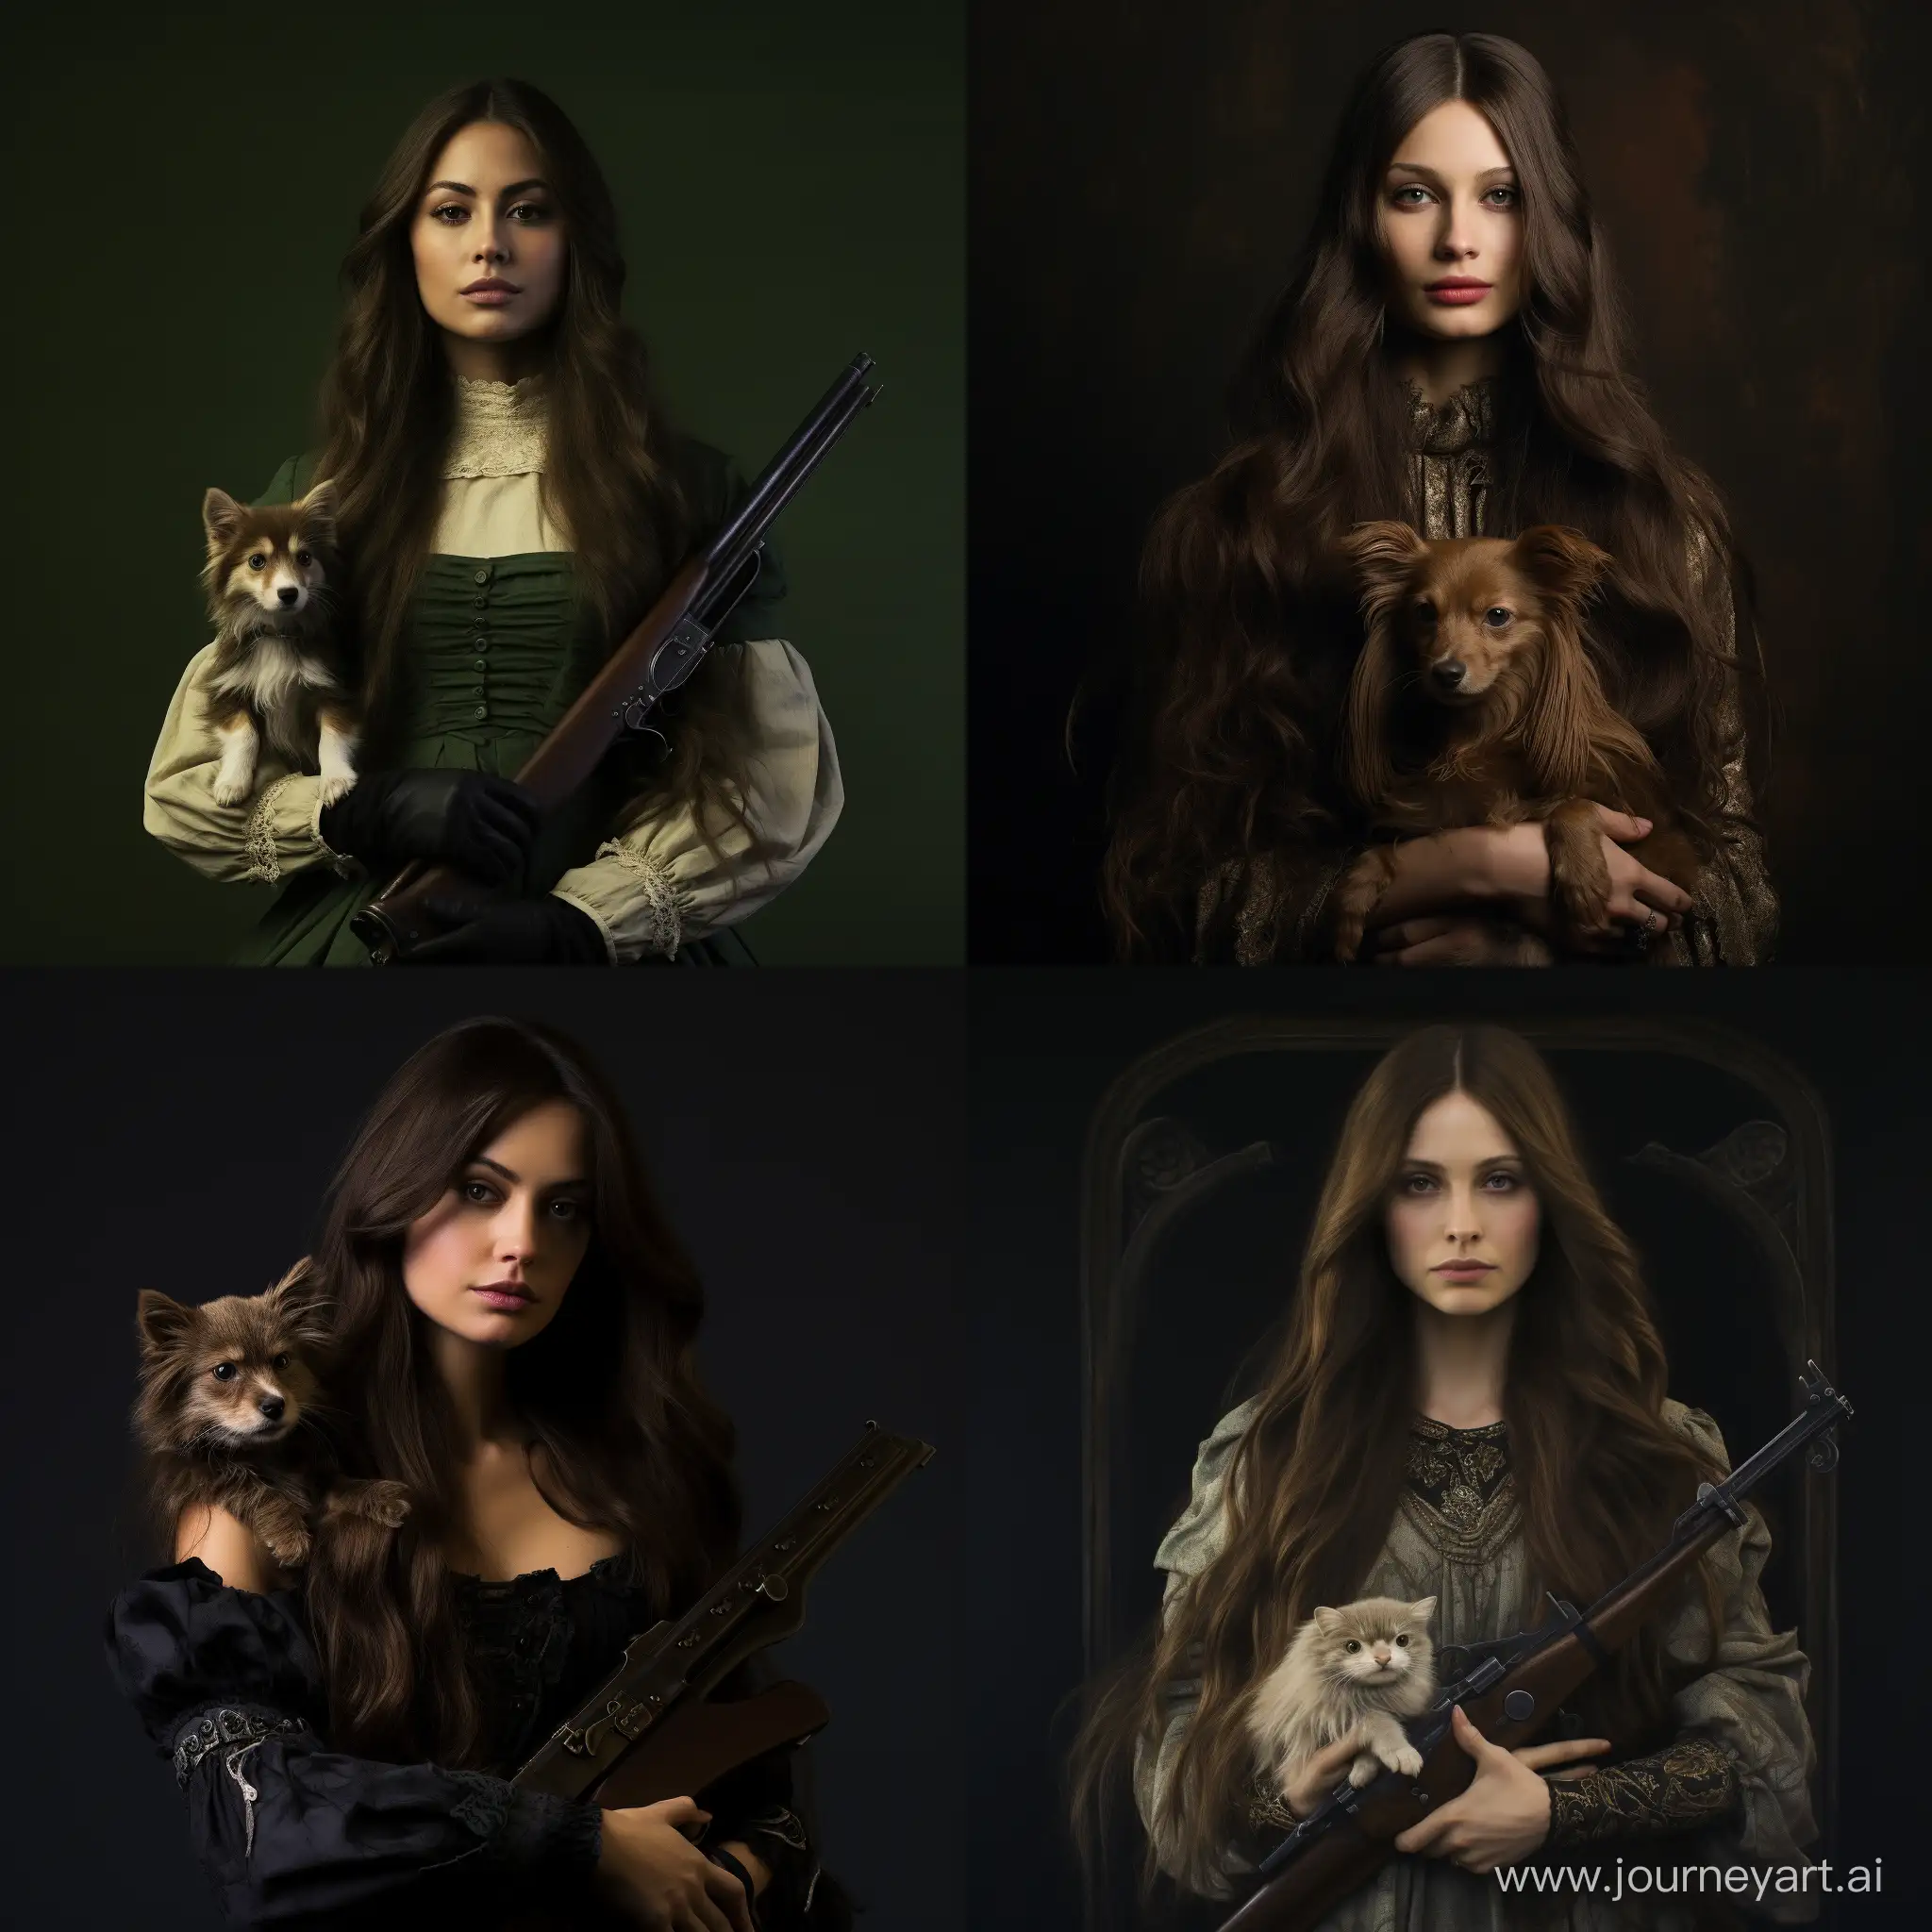 LongHaired-Girl-Holding-Remington-Artistic-Expression-in-a-11-Aspect-Ratio